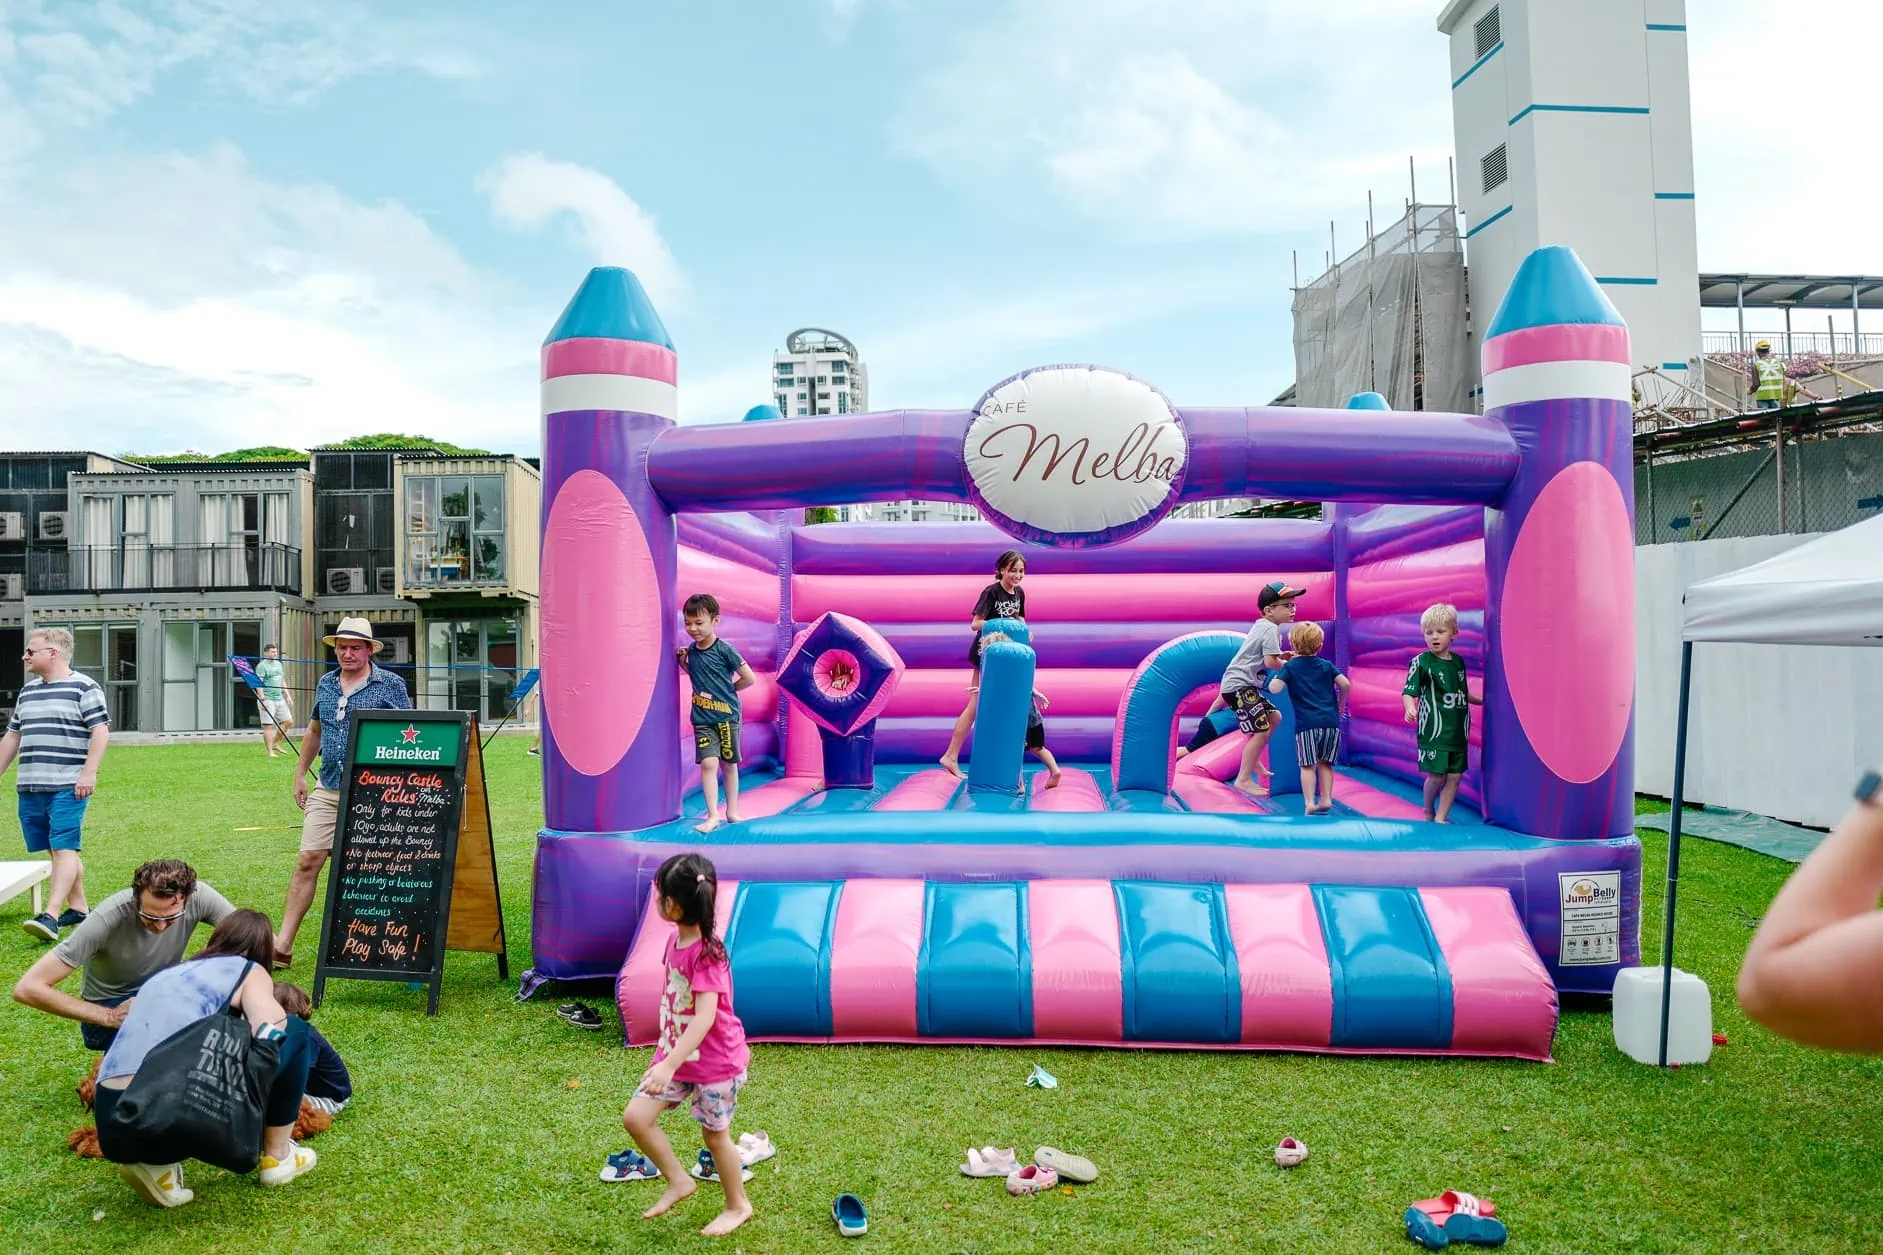 Cafe Melba is hosting its first ever retro-themed carnival featuring a vintage flea market, a bbq and pop-up bar, live music & more fun activities for the whole family